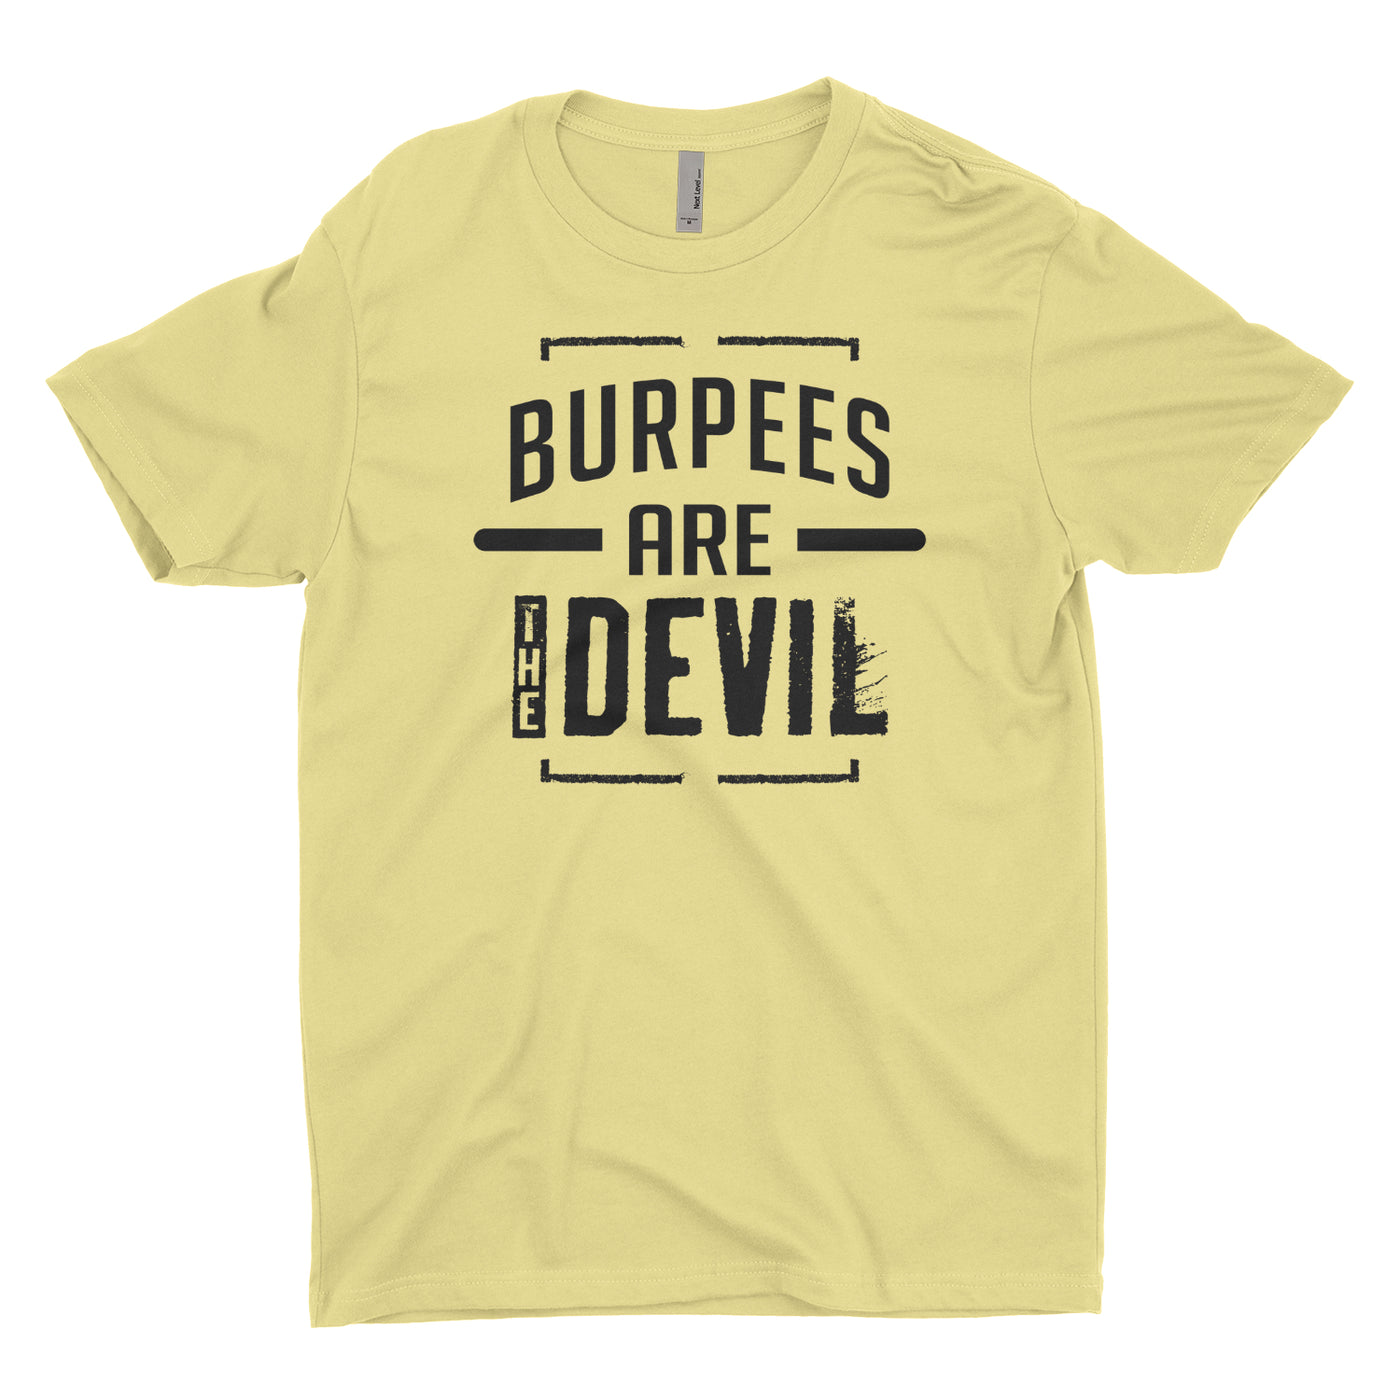 Burpees Are The Devil Blacked Out